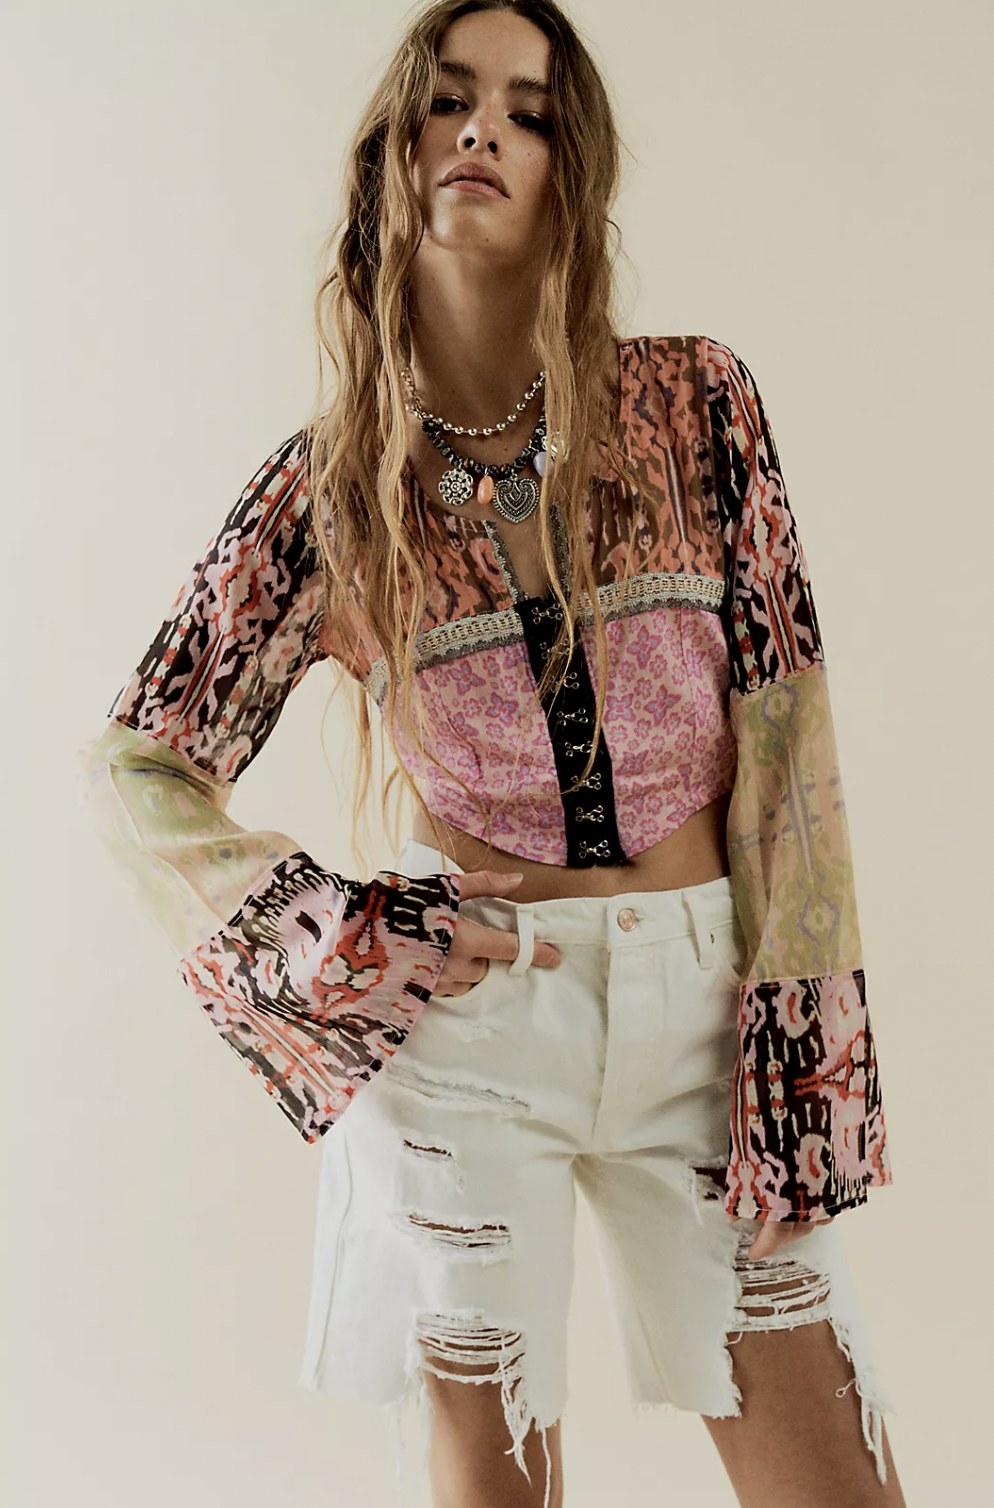 Model in the patterned statement top